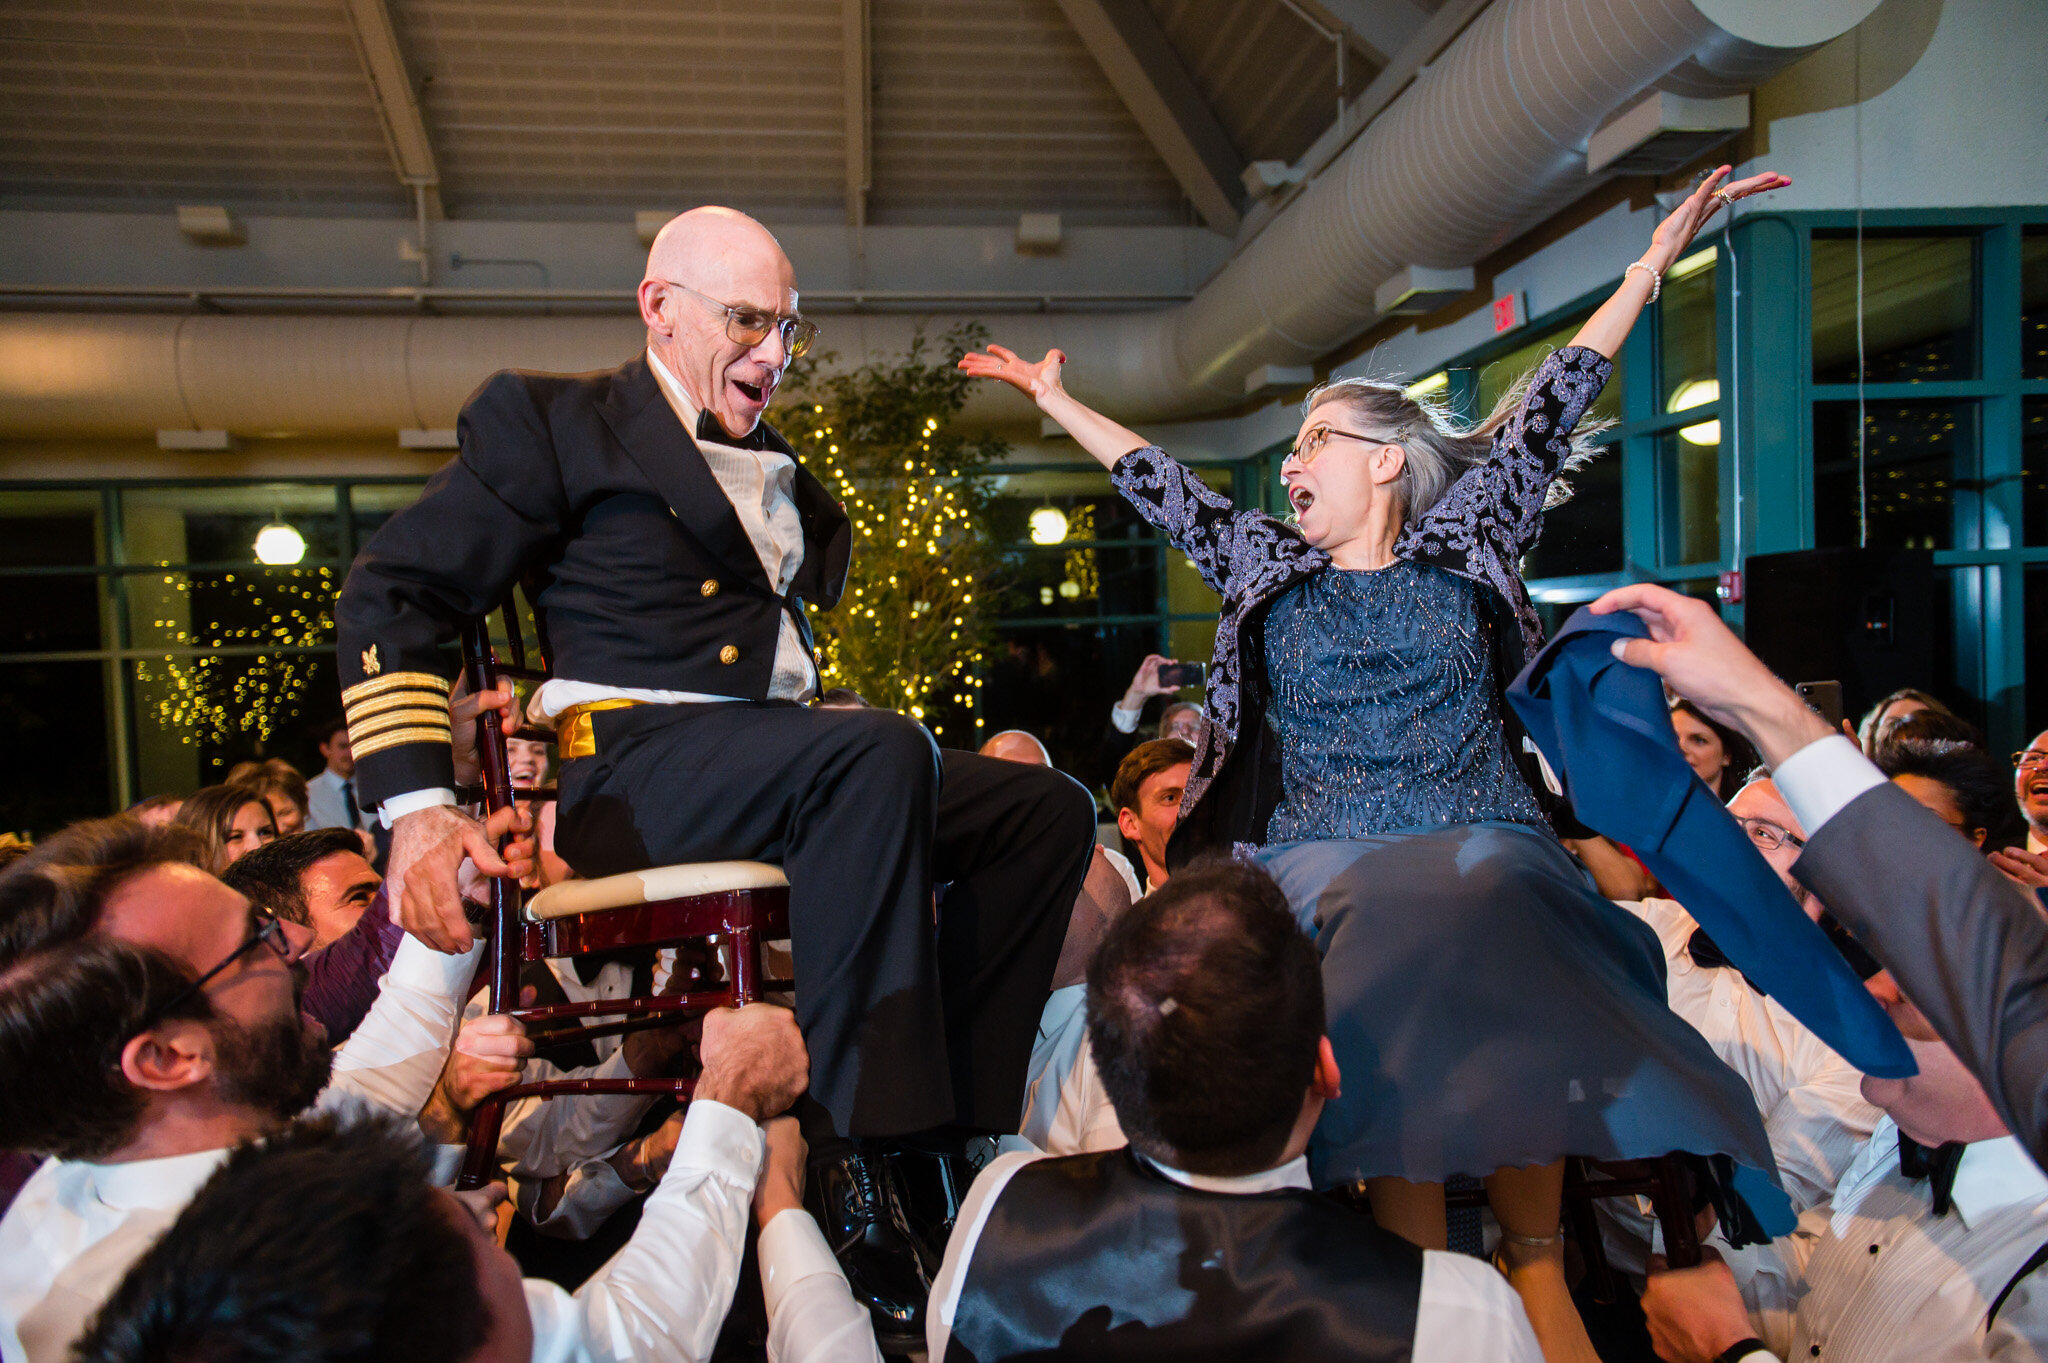 The Hora dance at a Jewish wedding reception